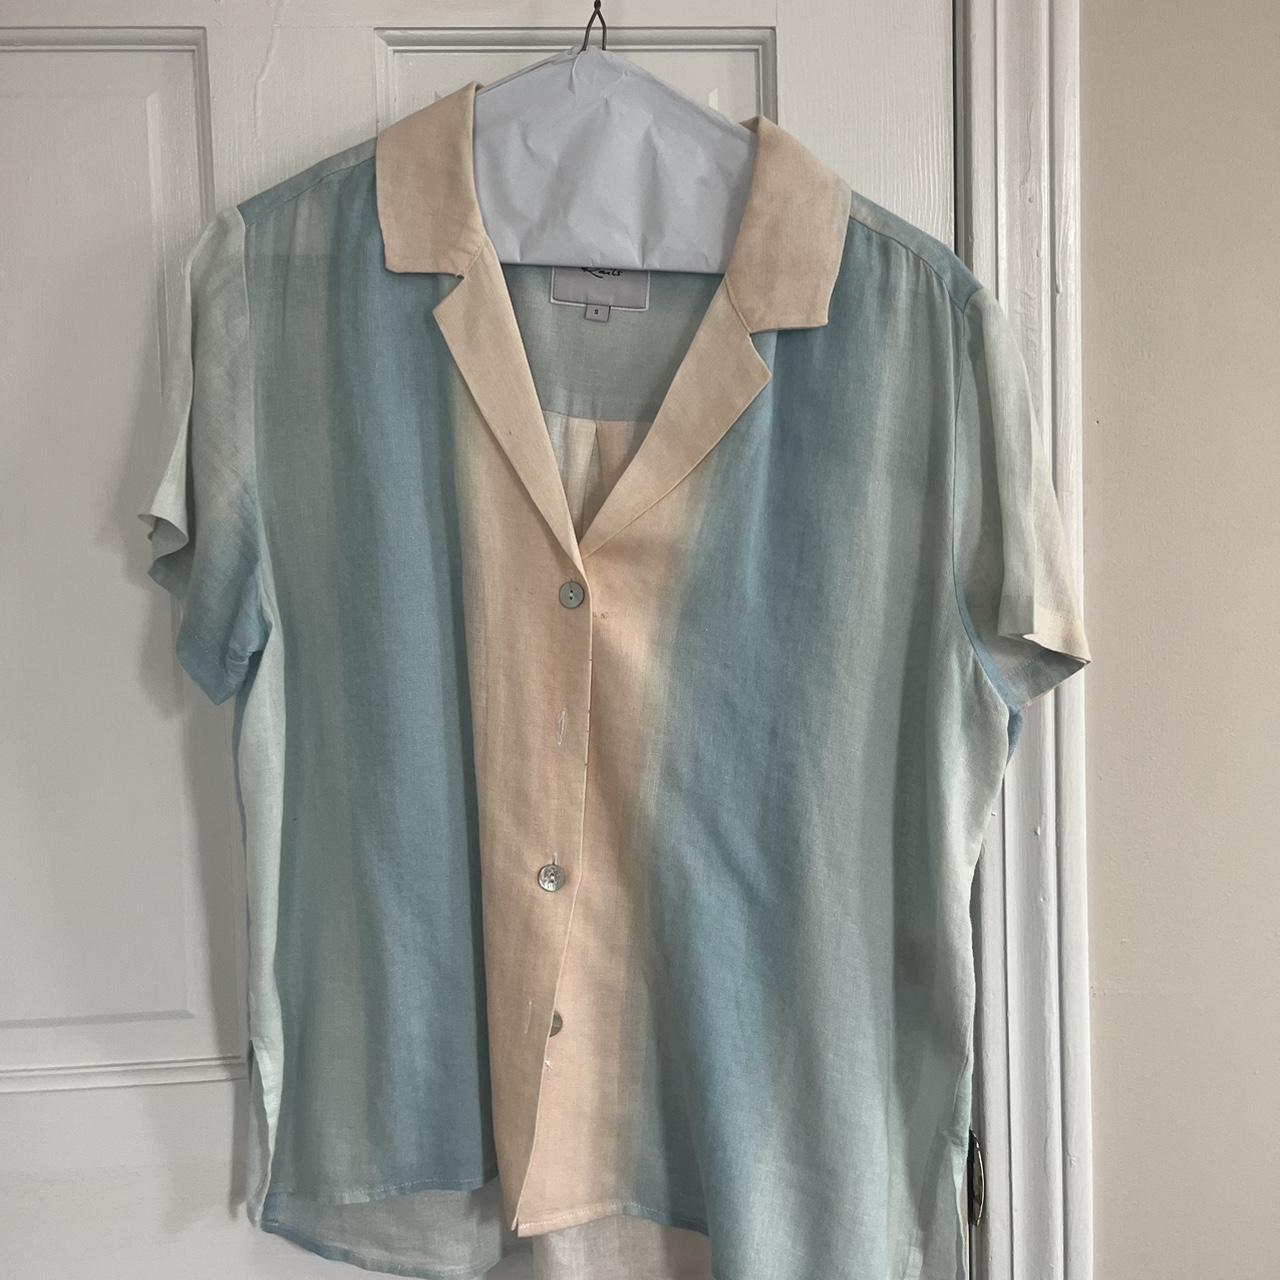 Rails blouse very small stain on front - Depop